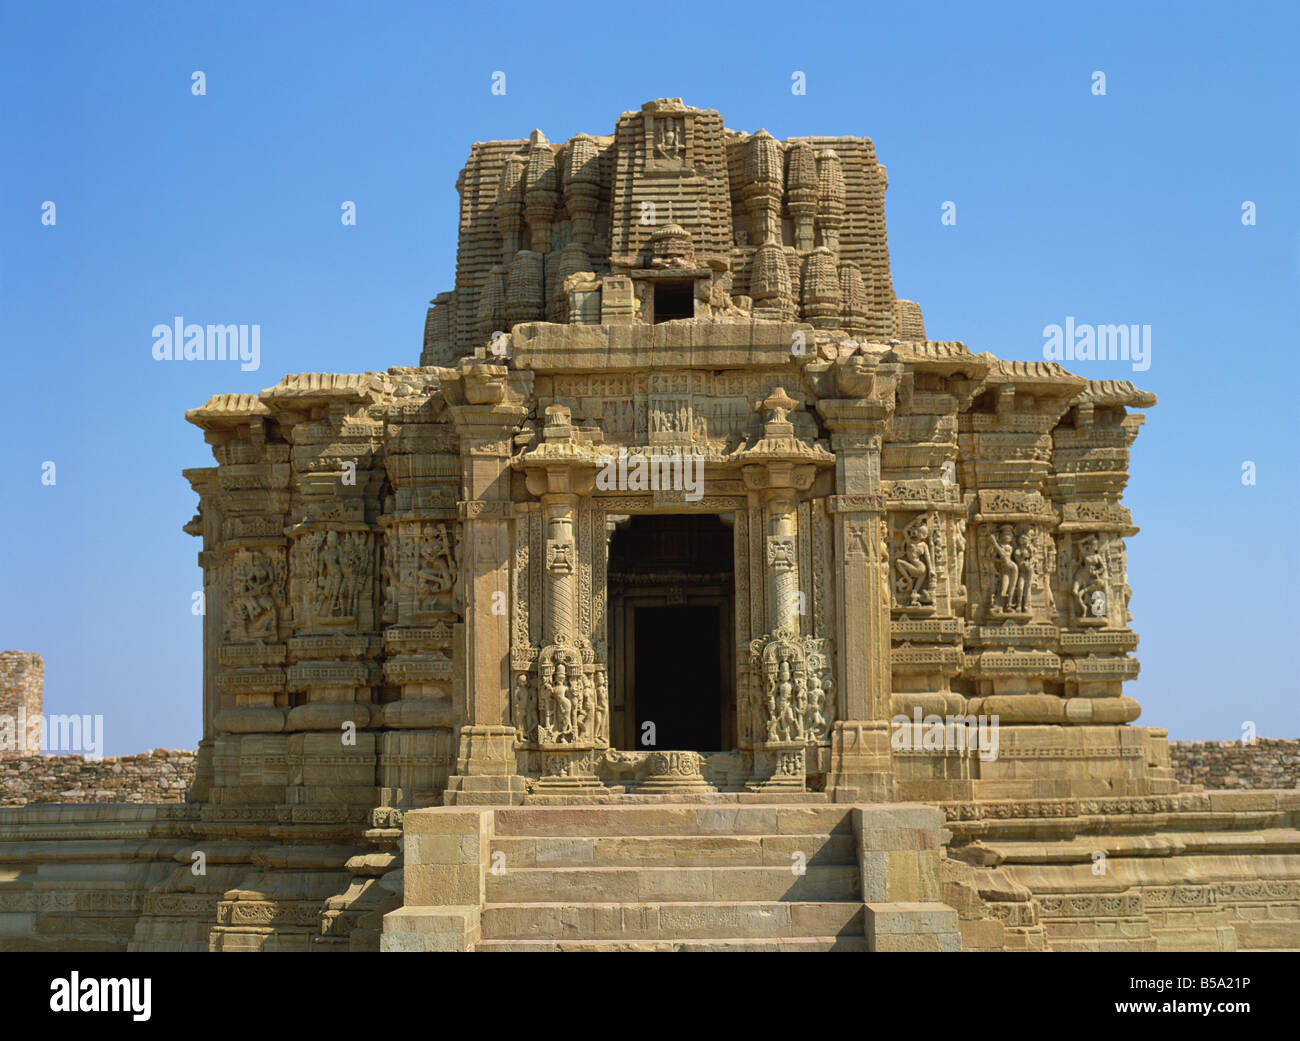 Adbhutanatha Temple dedicated to Shiva and dating from the 15th century Chittorgarh Fort Rajasthan state India Asia Stock Photo